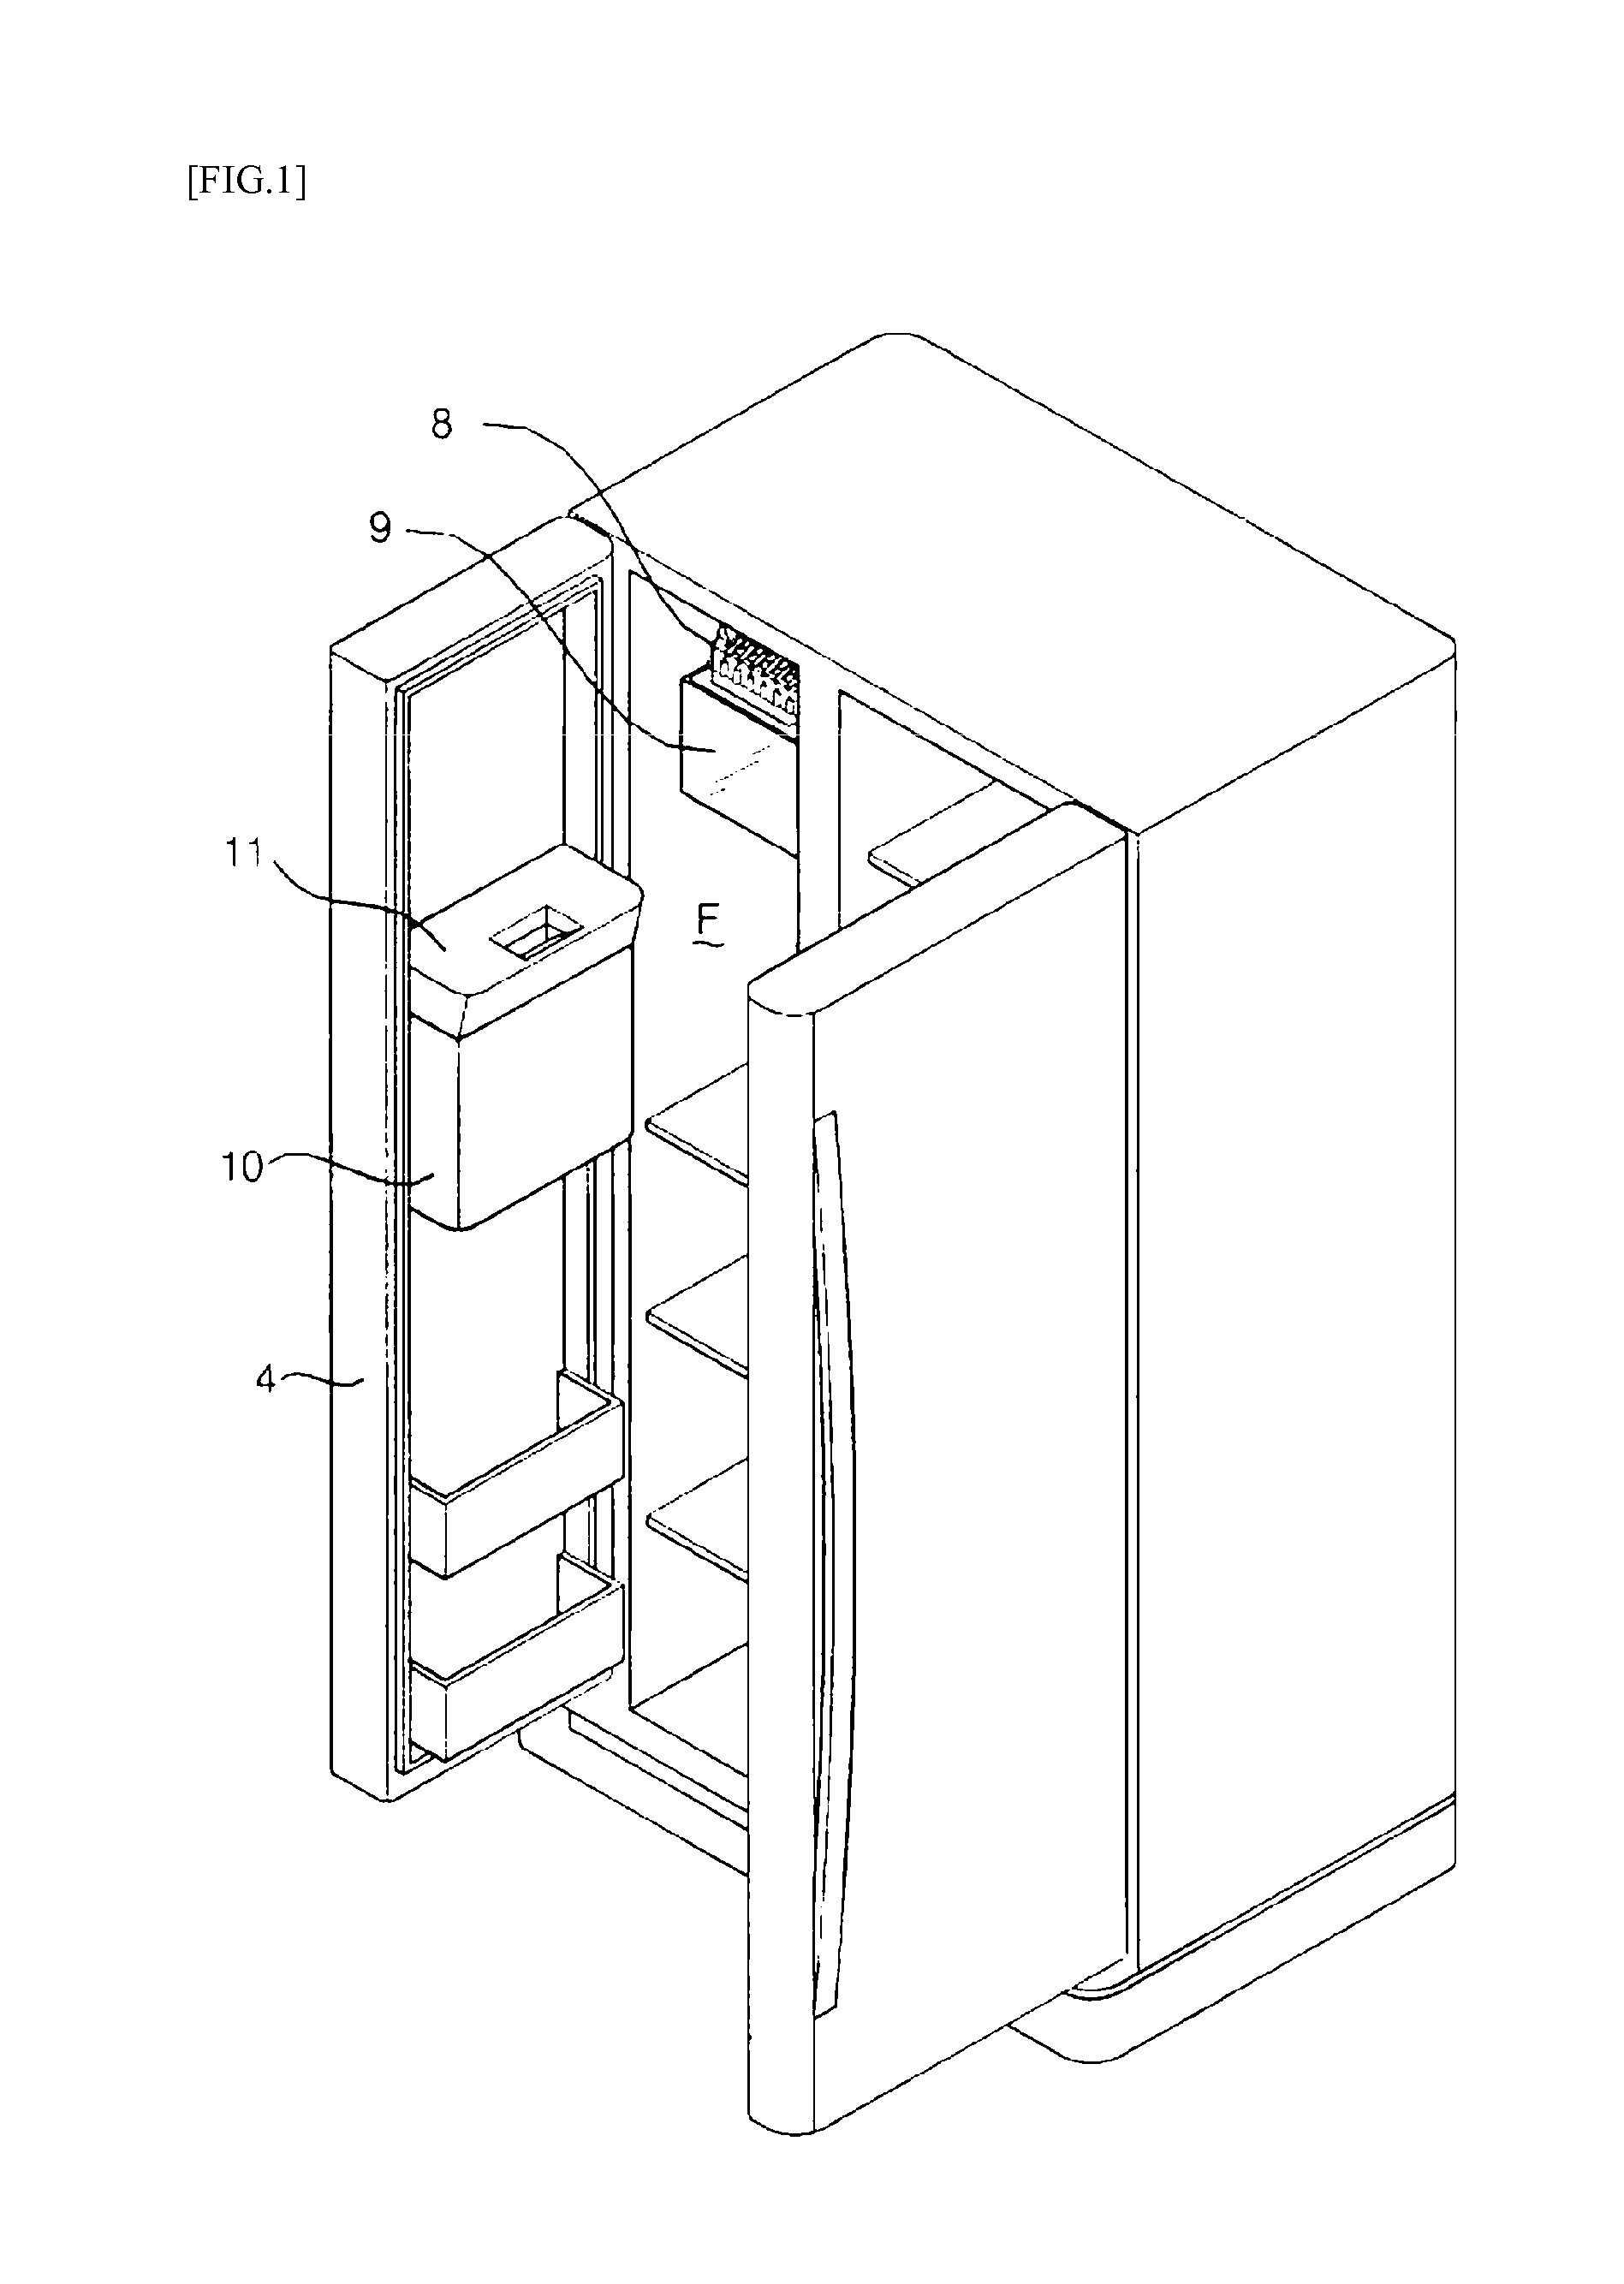 Ice maker for a refrigerator